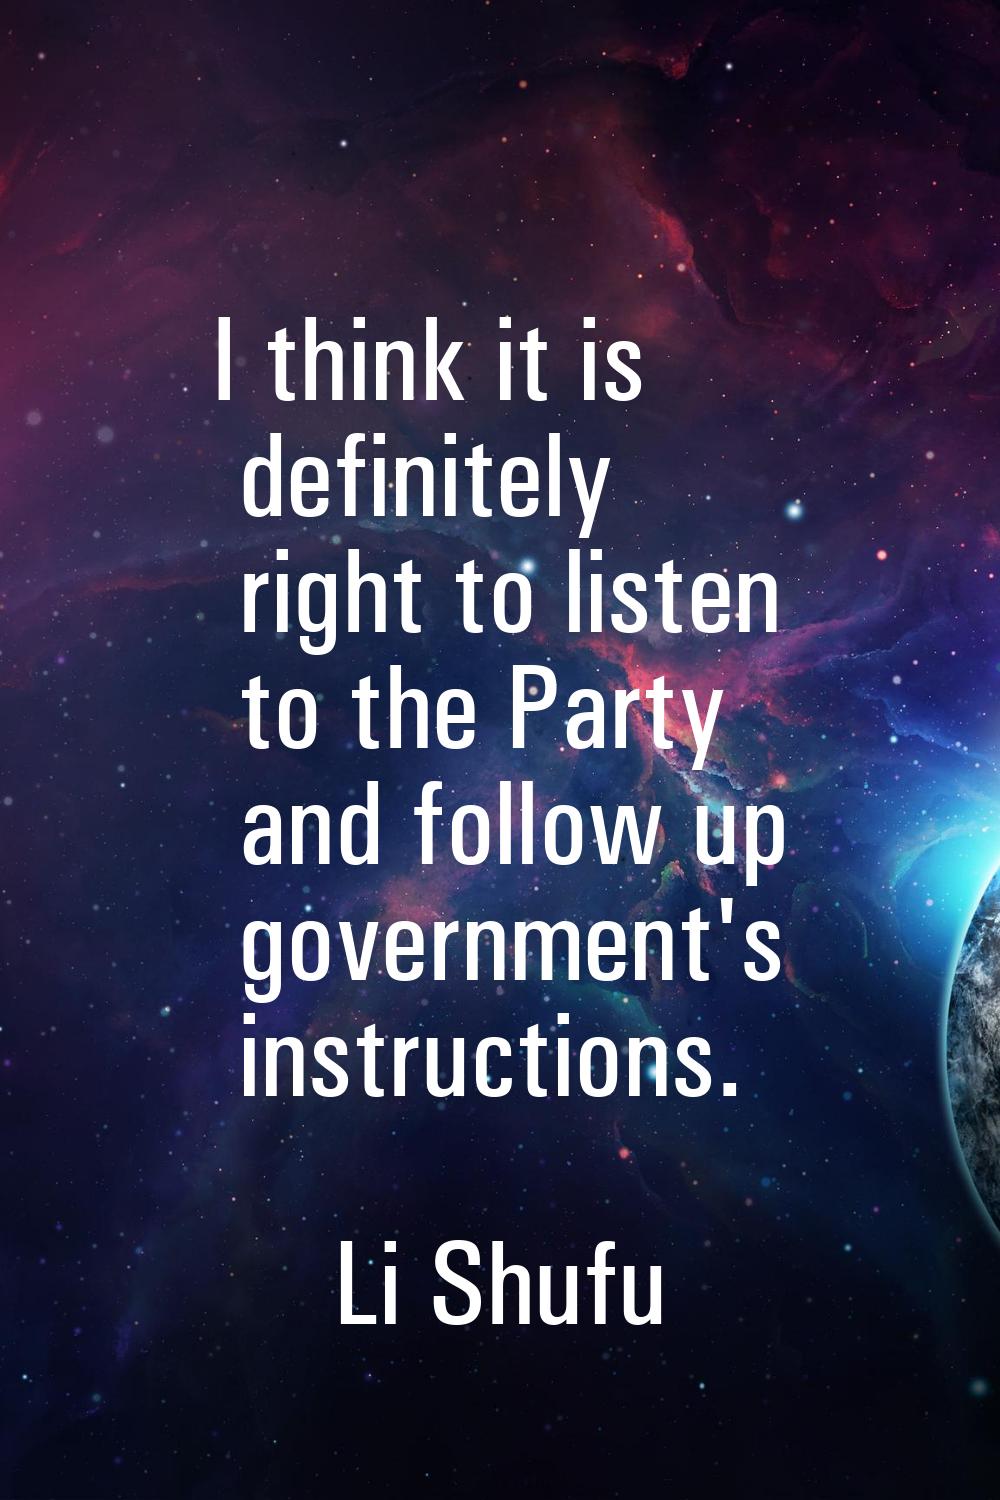 I think it is definitely right to listen to the Party and follow up government's instructions.